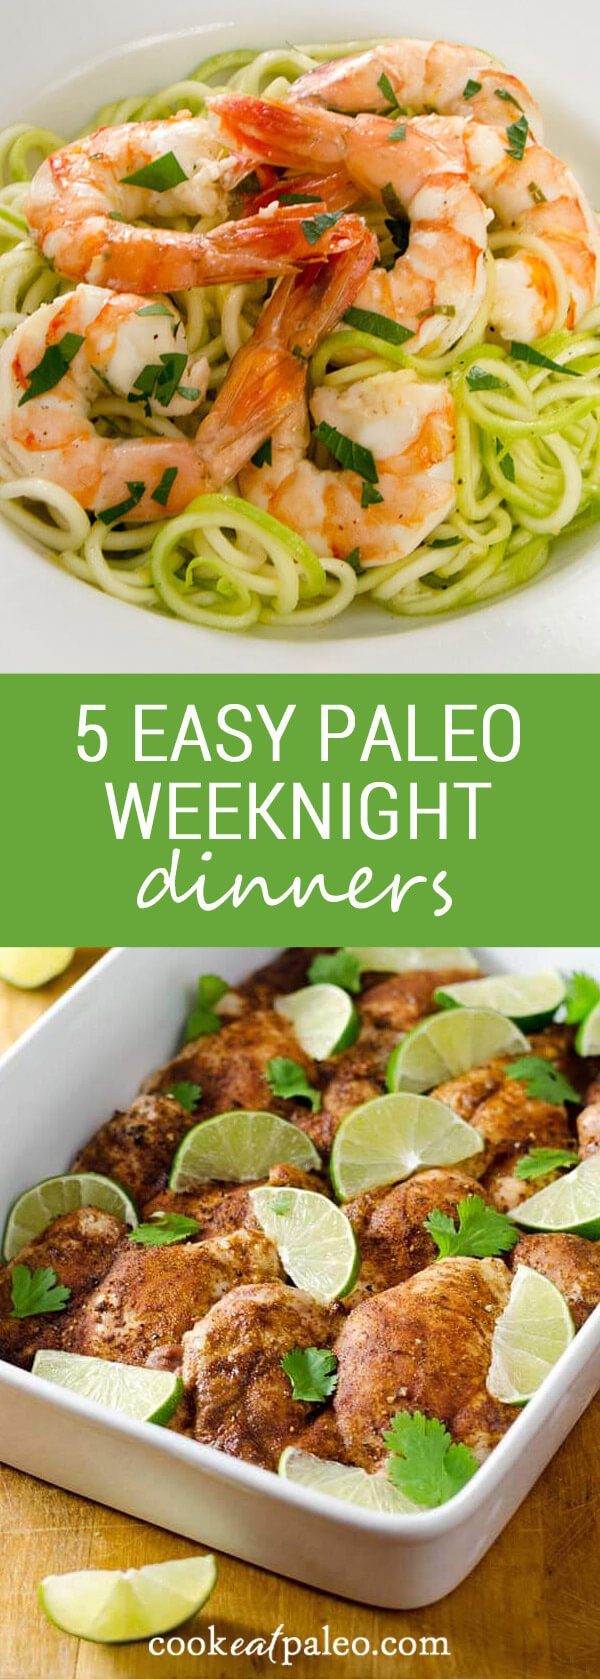 The Best Ideas for Easy Weeknight Dinners for Two - Home, Family, Style ...